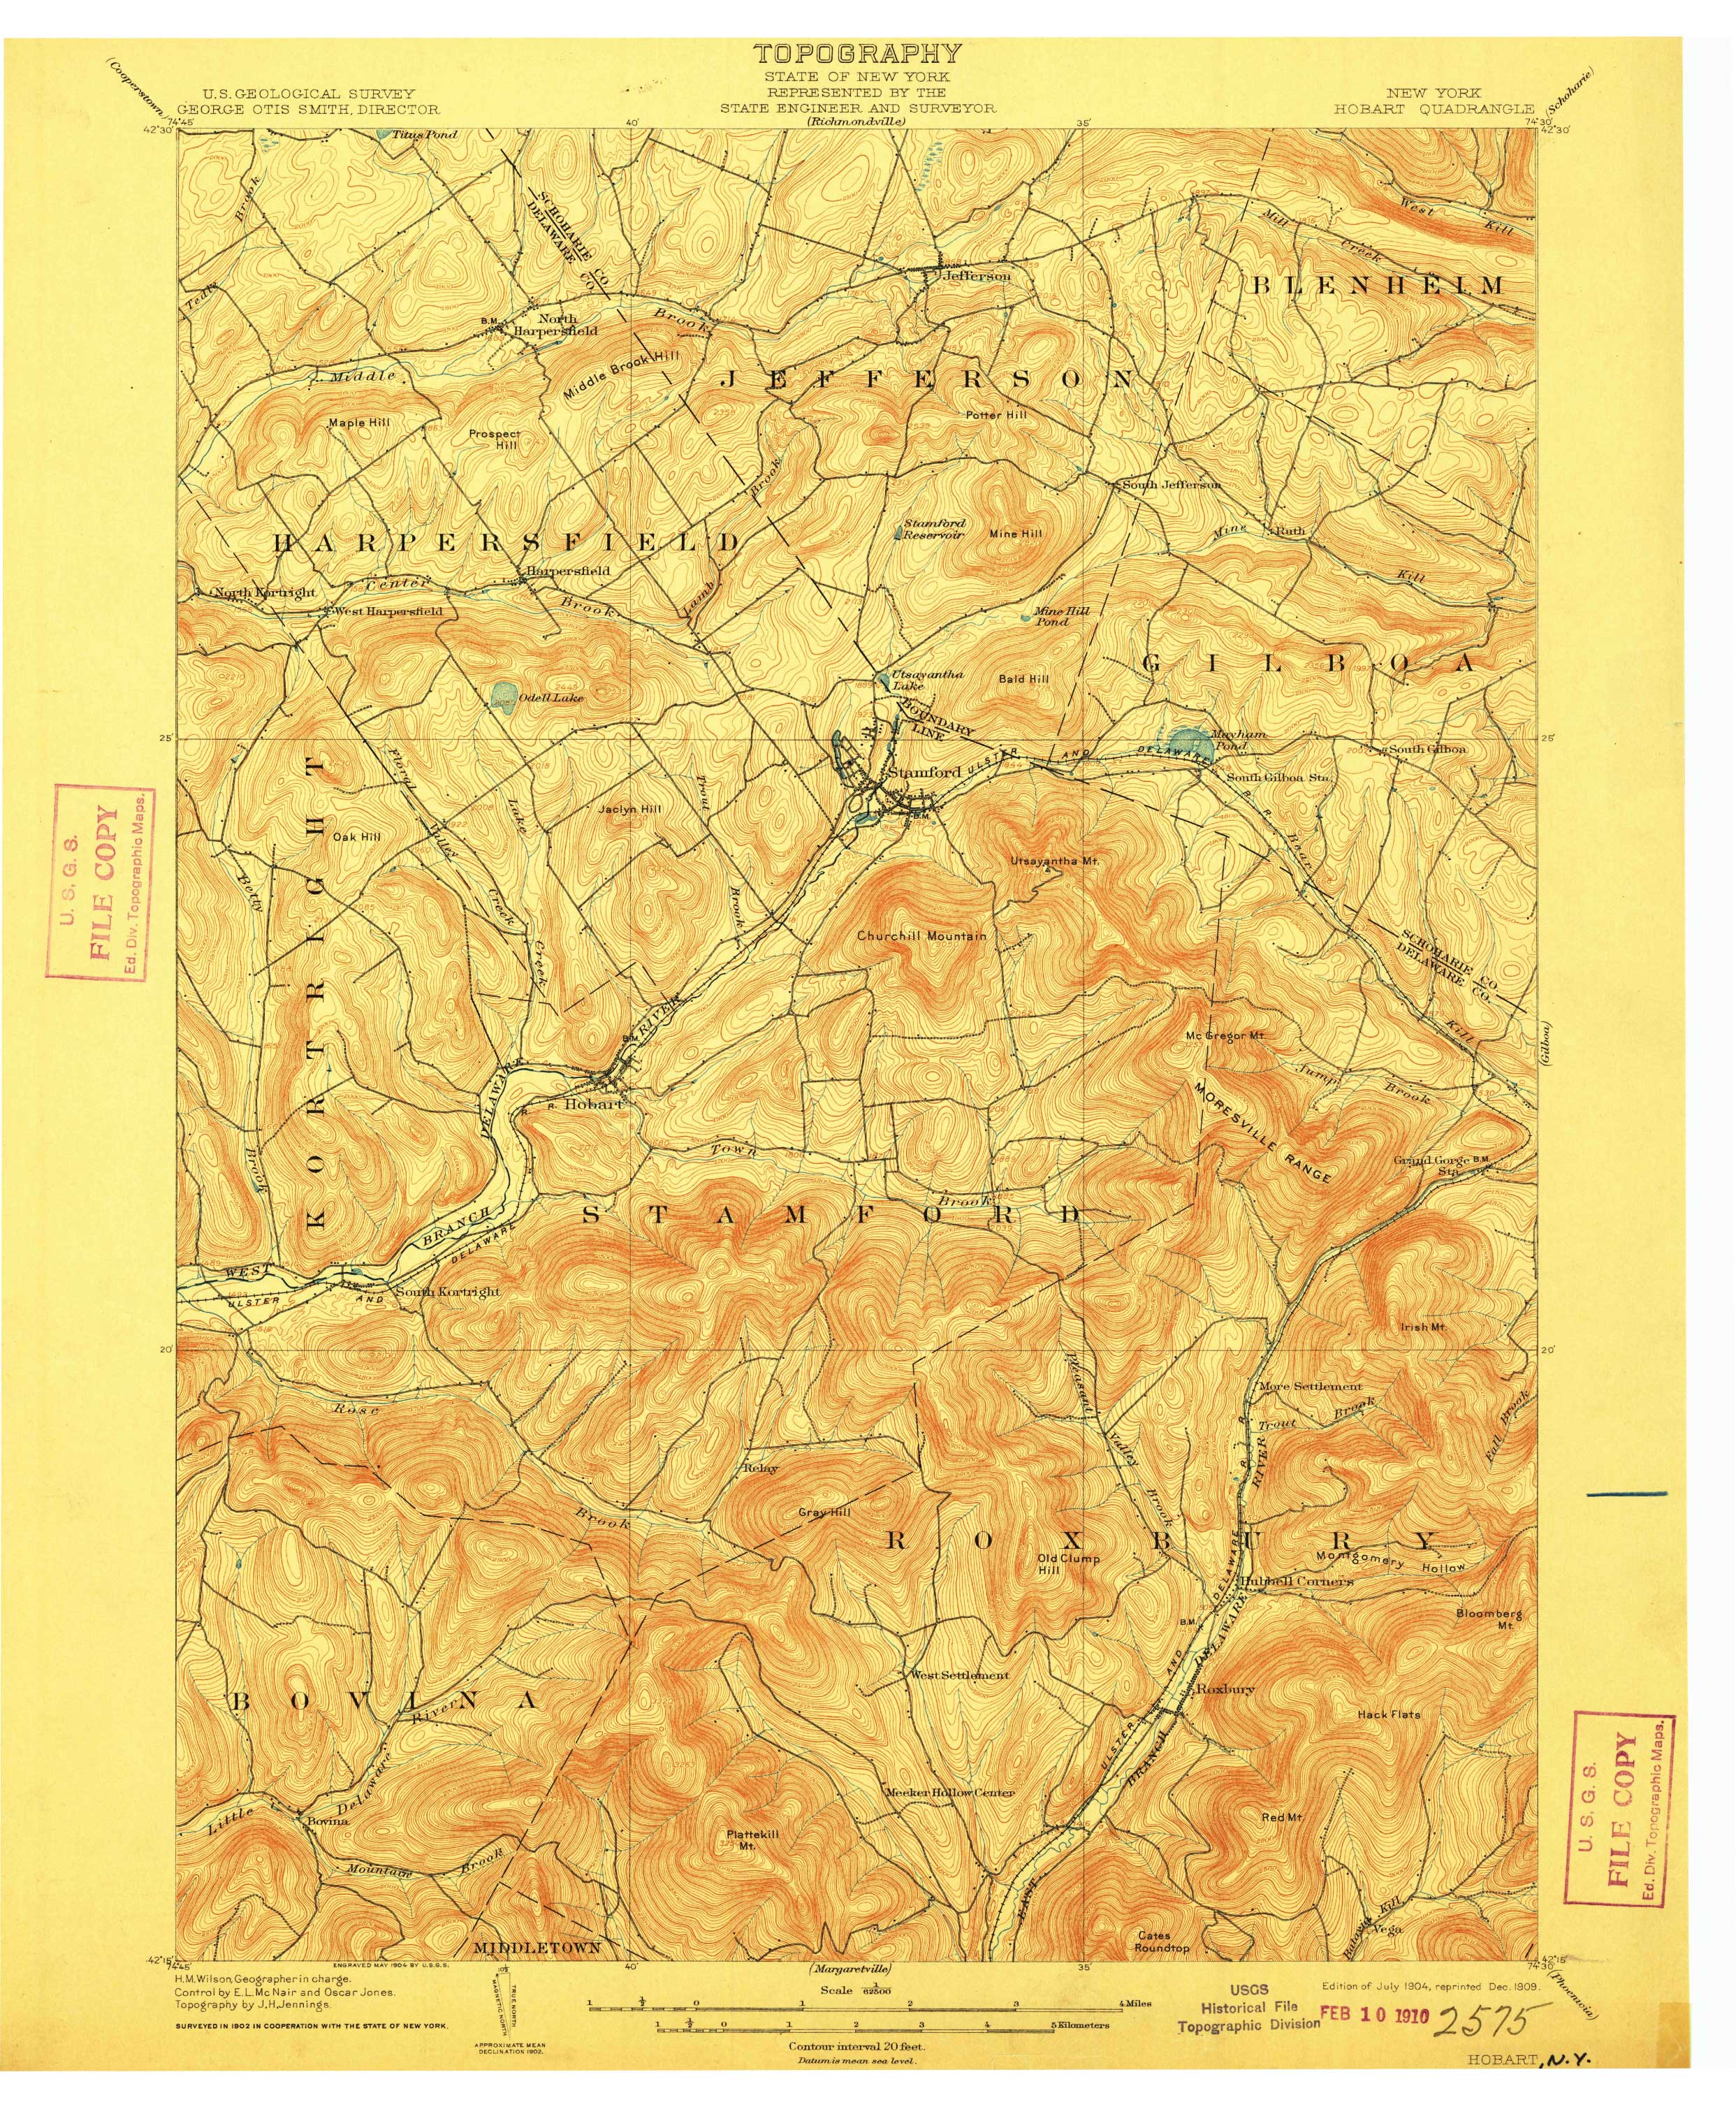 1904 USGS topographical map of Hobart